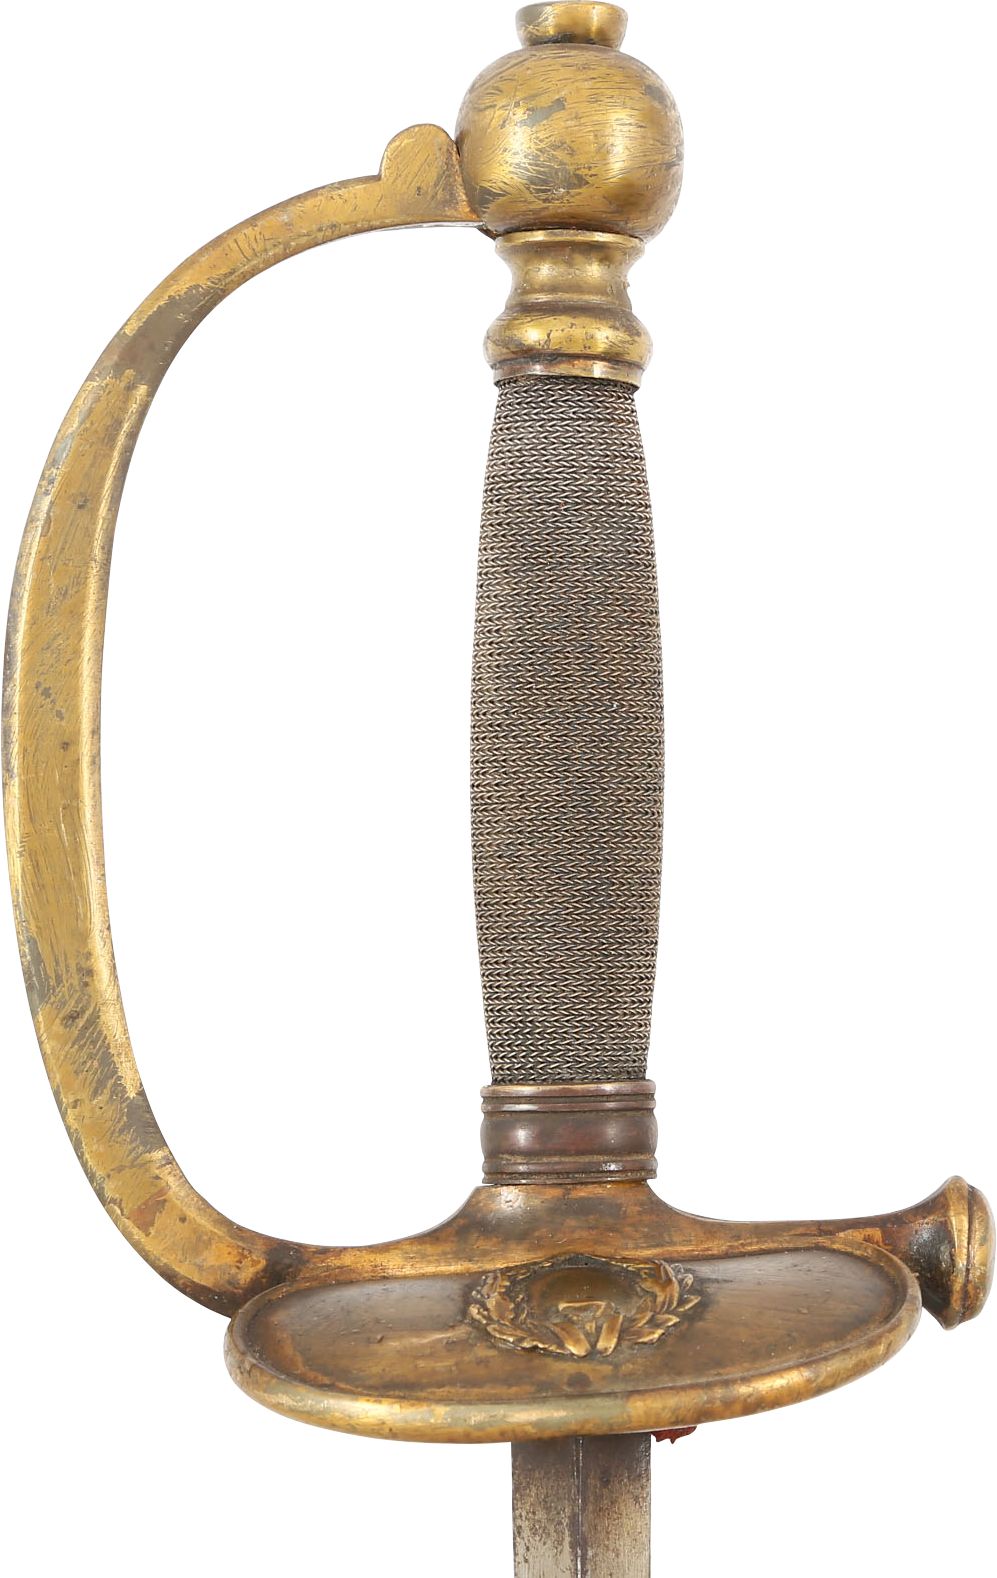 FRENCH M.1872 OFFICER’S SWORD - Fagan Arms